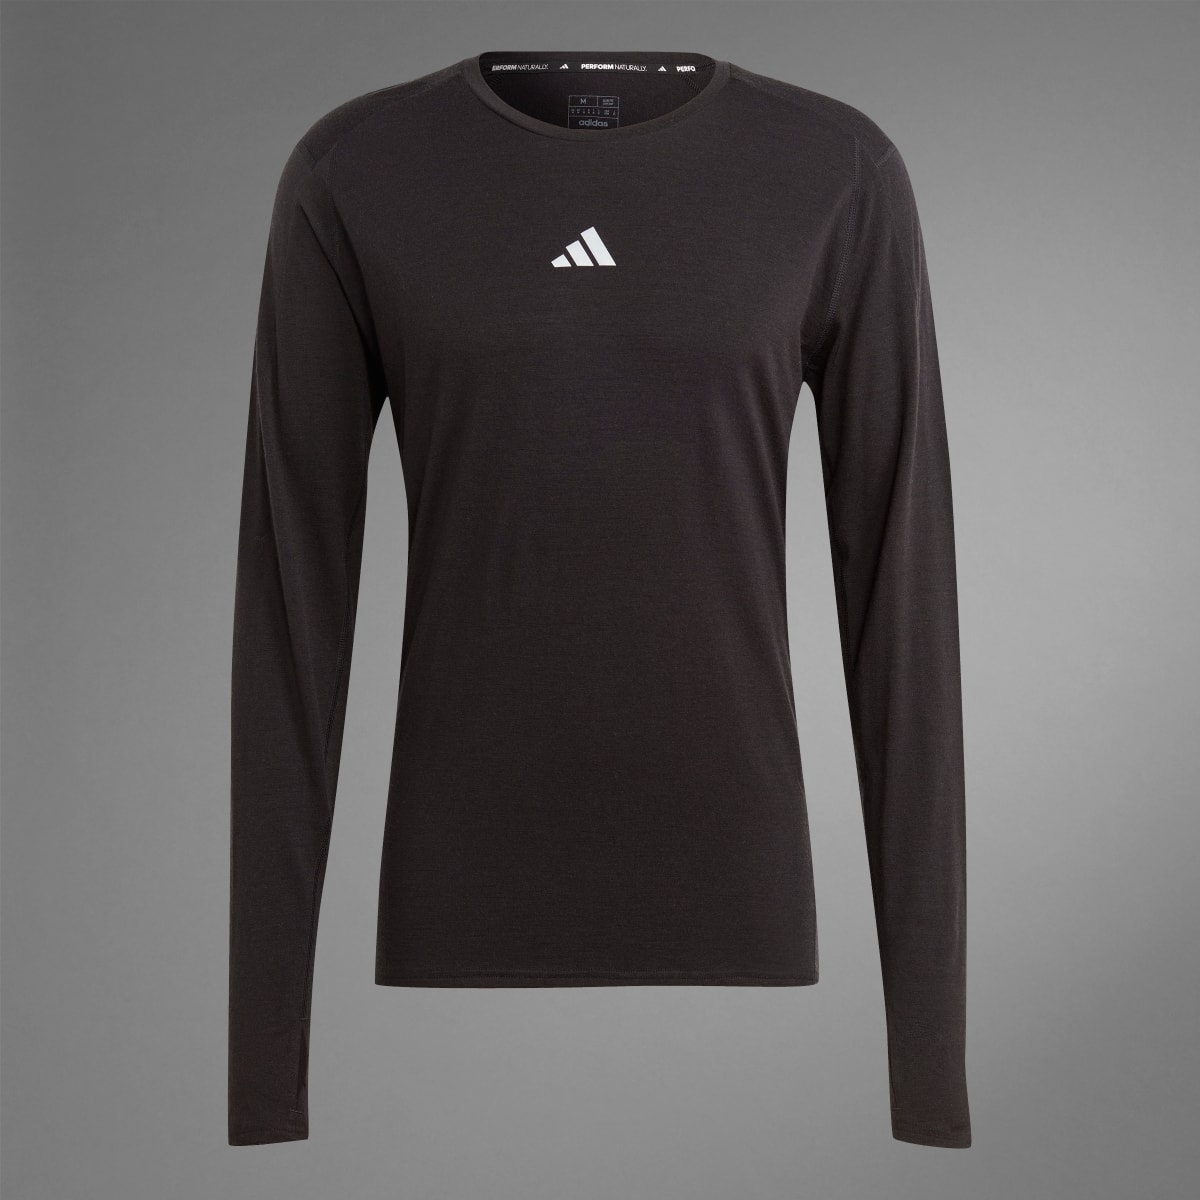 Adidas Ultimate Running Conquer the Elements Merino Long Sleeve Long-sleeve Top. 9